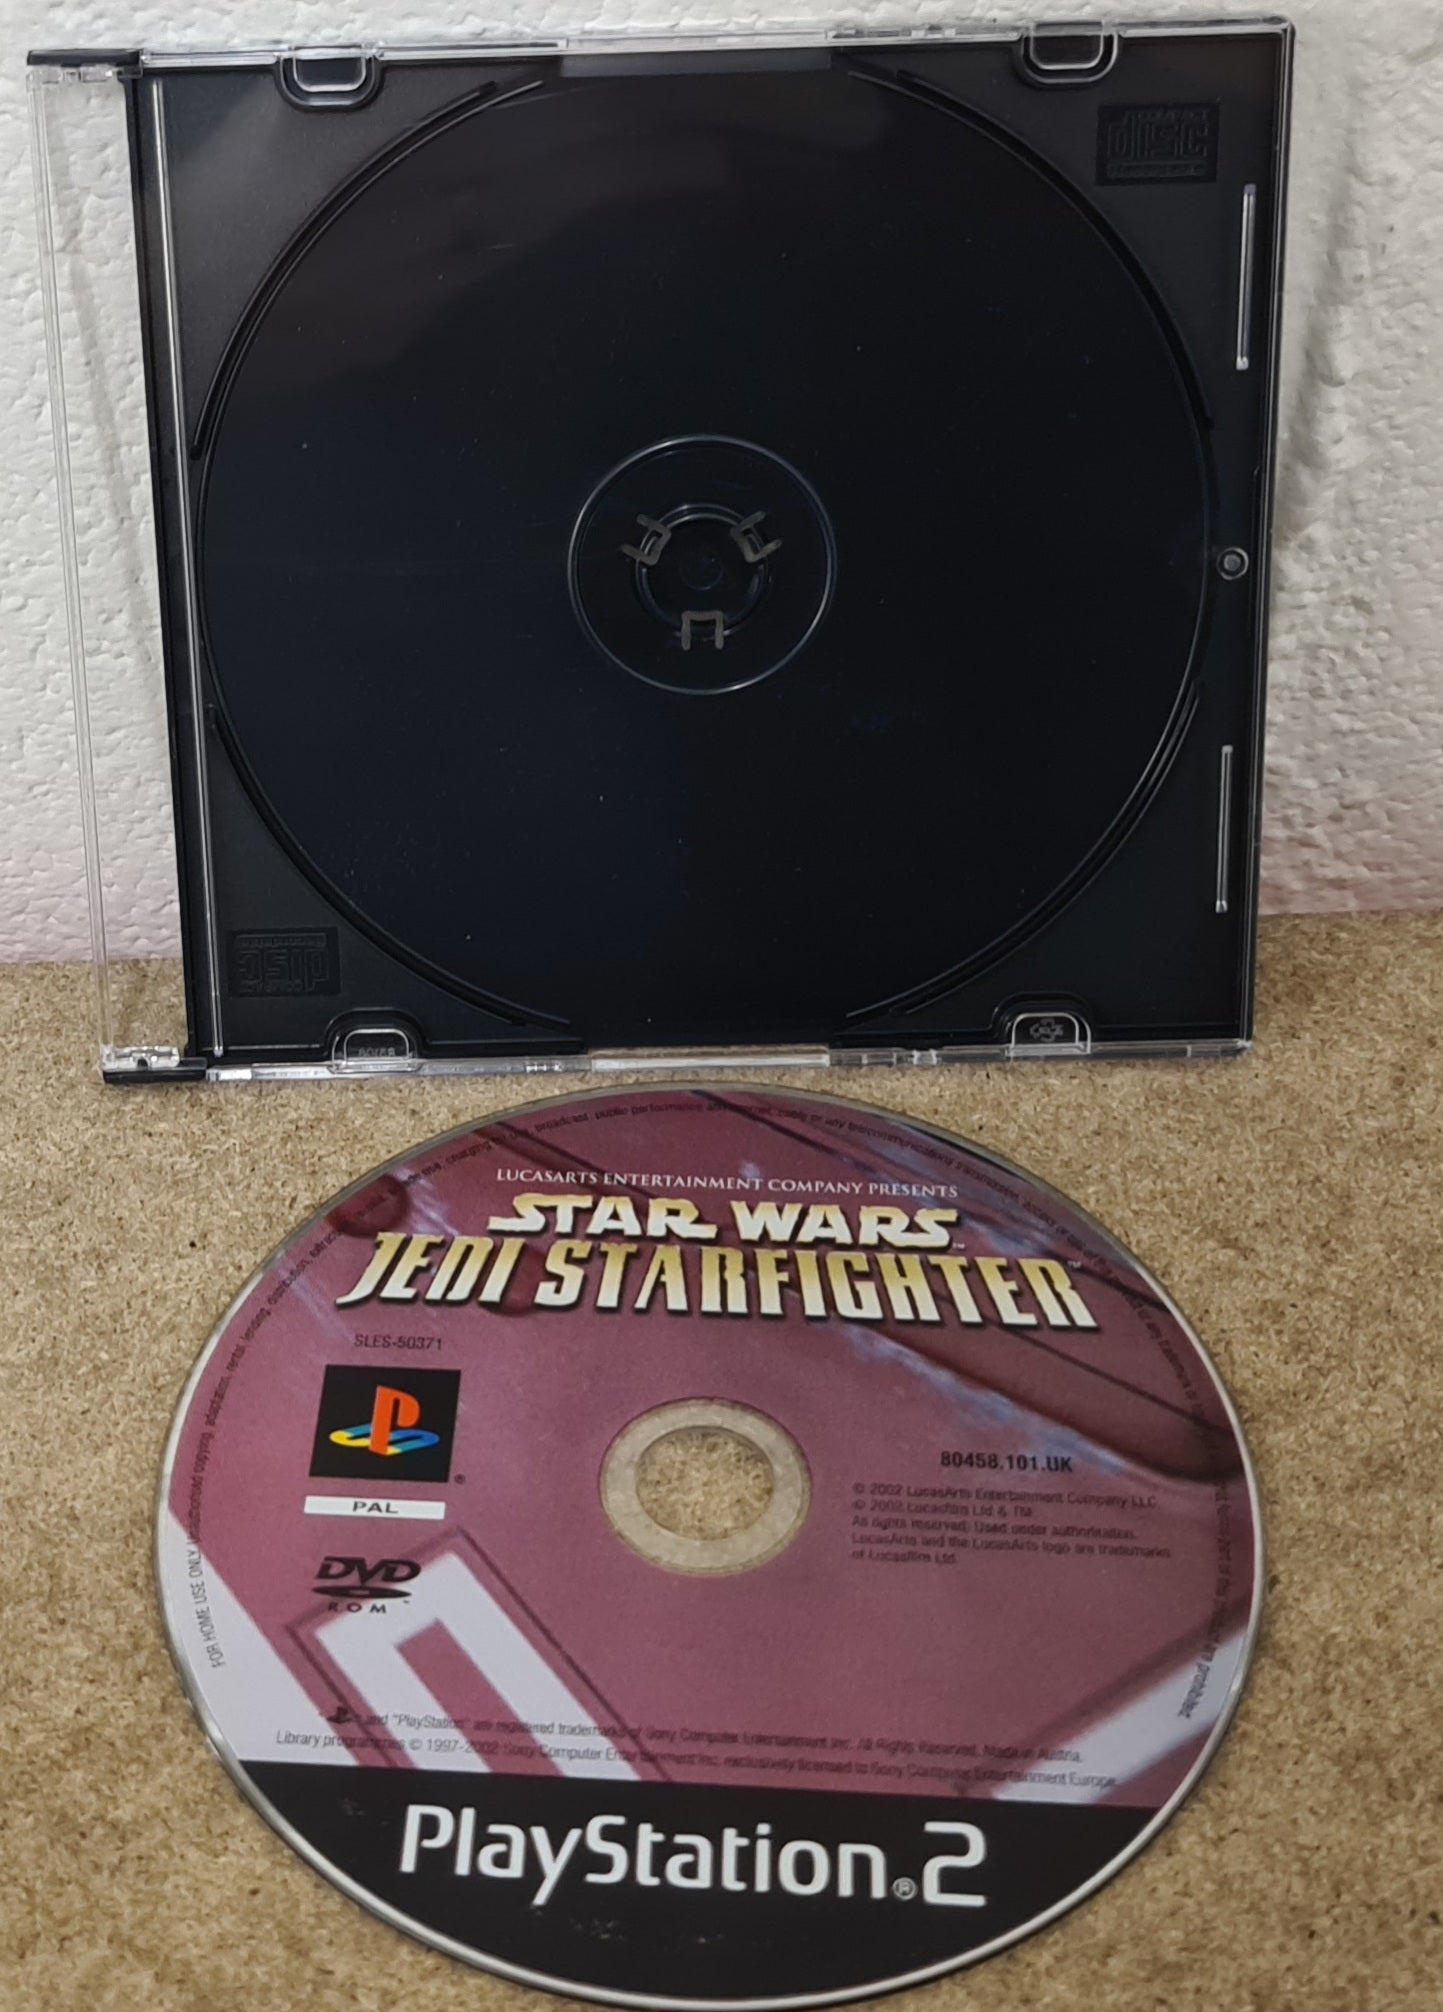 Star Wars Jedi Starfighter Sony Playstation 2 (PS2) Game Disc Only